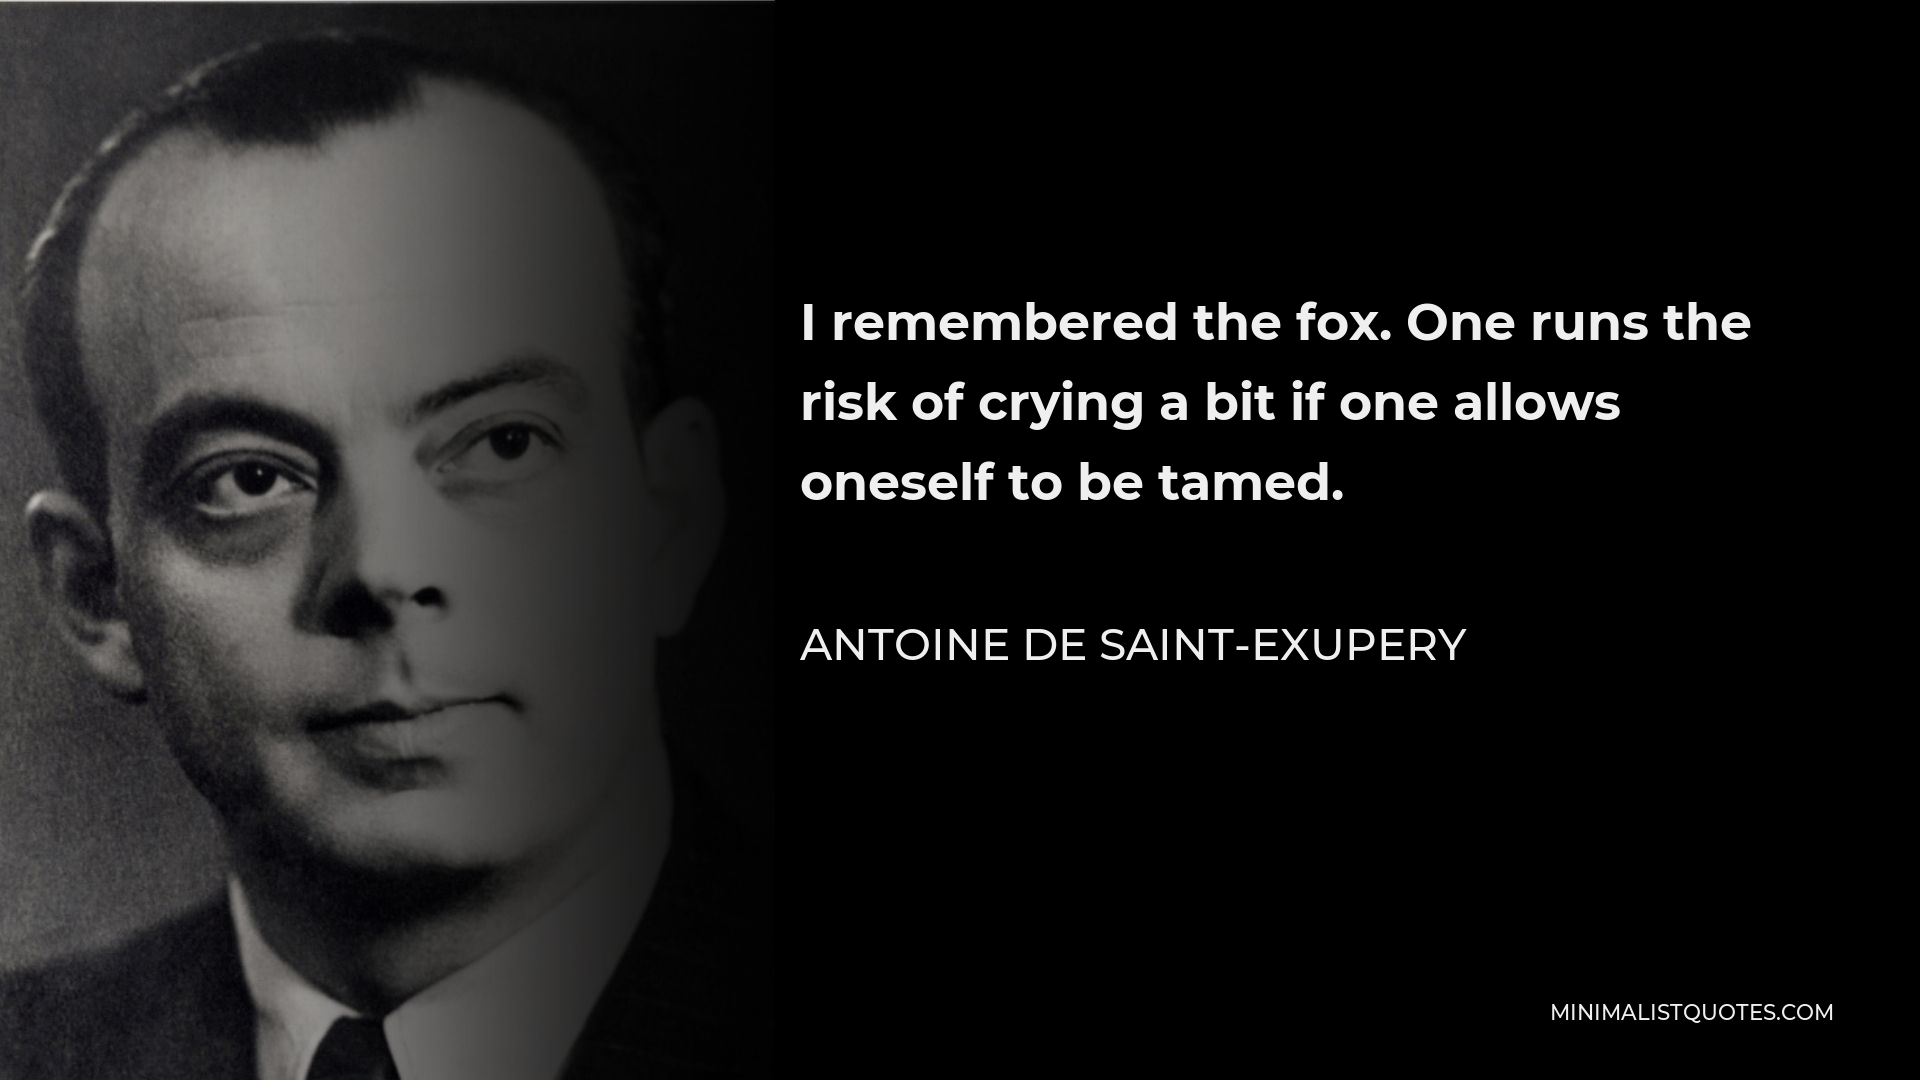 Antoine de Saint-Exupery Quote - I remembered the fox. One runs the risk of crying a bit if one allows oneself to be tamed.